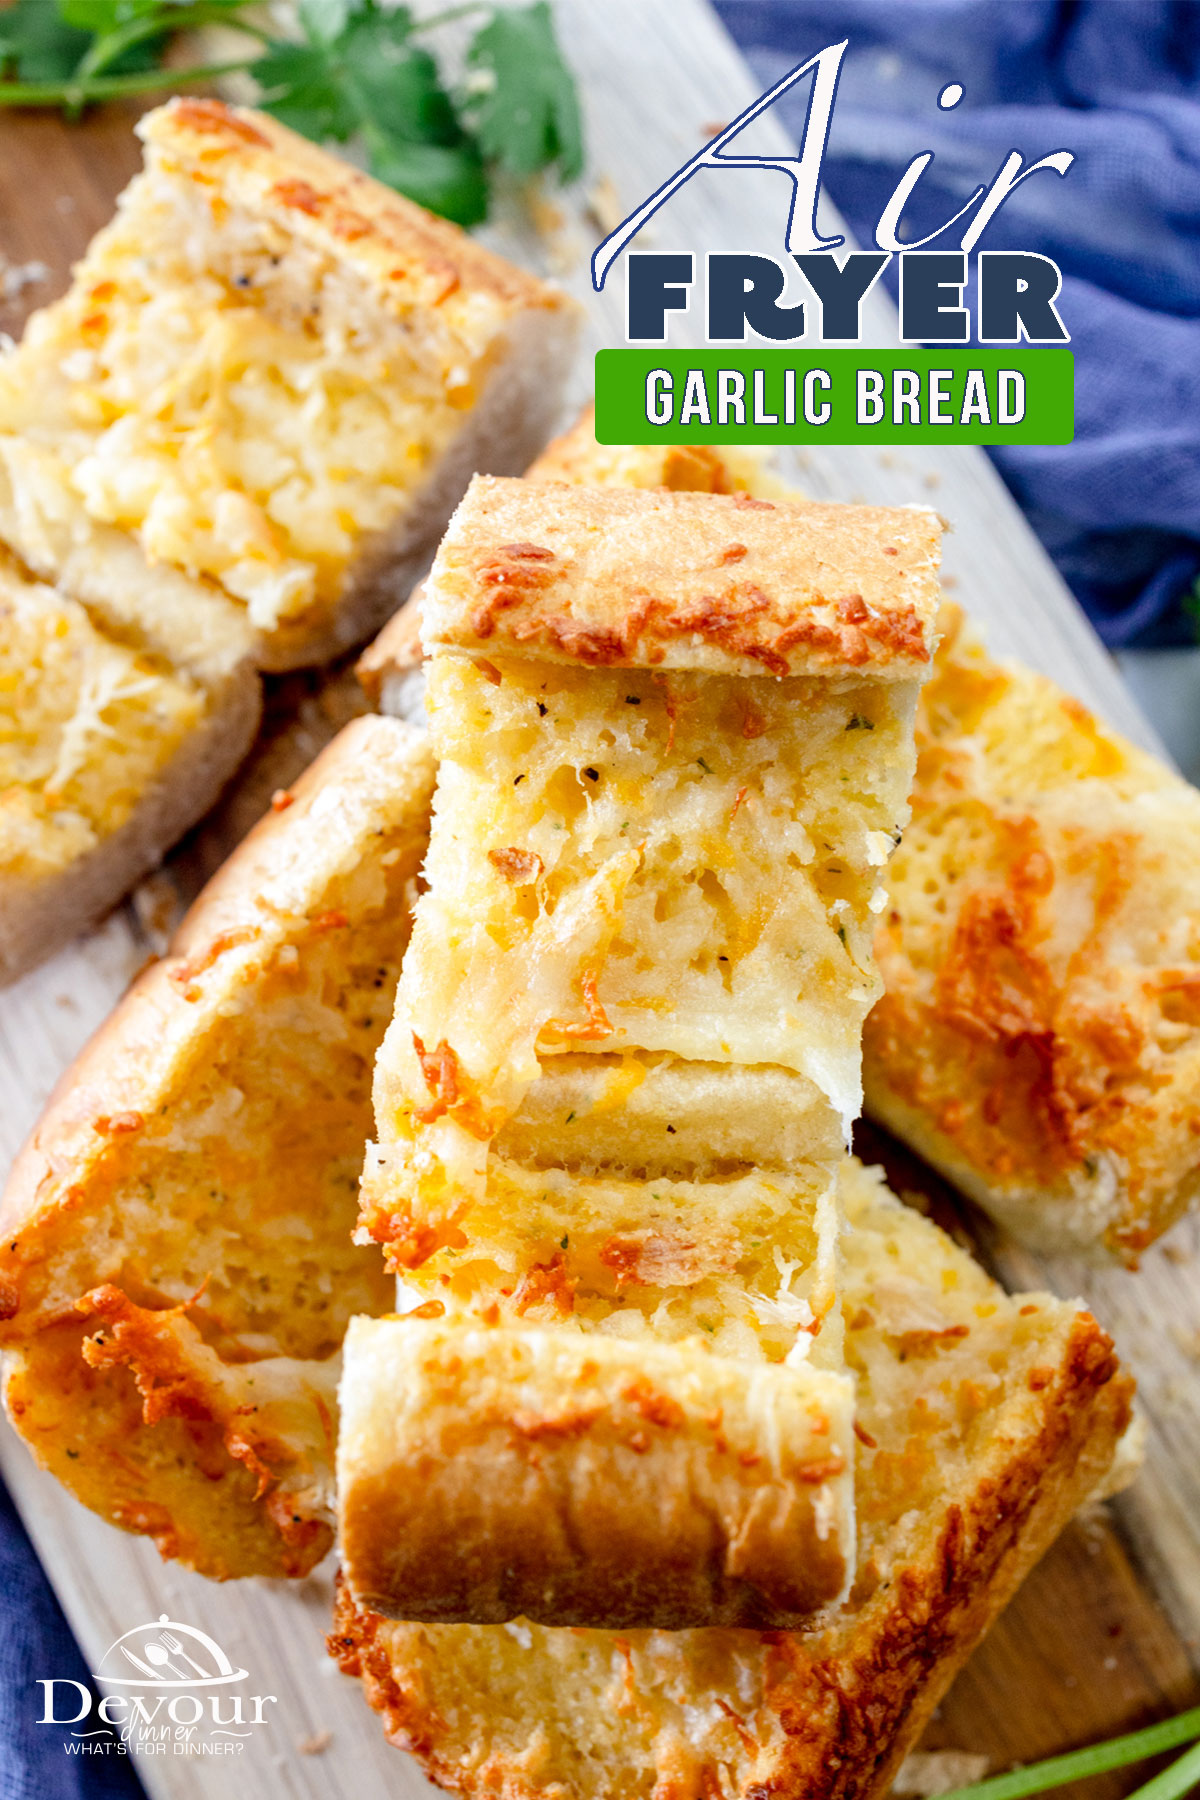 This Frozen Garlic Bread in Air Fryer method ensures golden brown, buttery garlic bread in less time, with minimal effort! Garlic Toast is a perfect side dish for those busy weeknights, a comforting addition to pasta dishes, or even as a quick snack on its own!